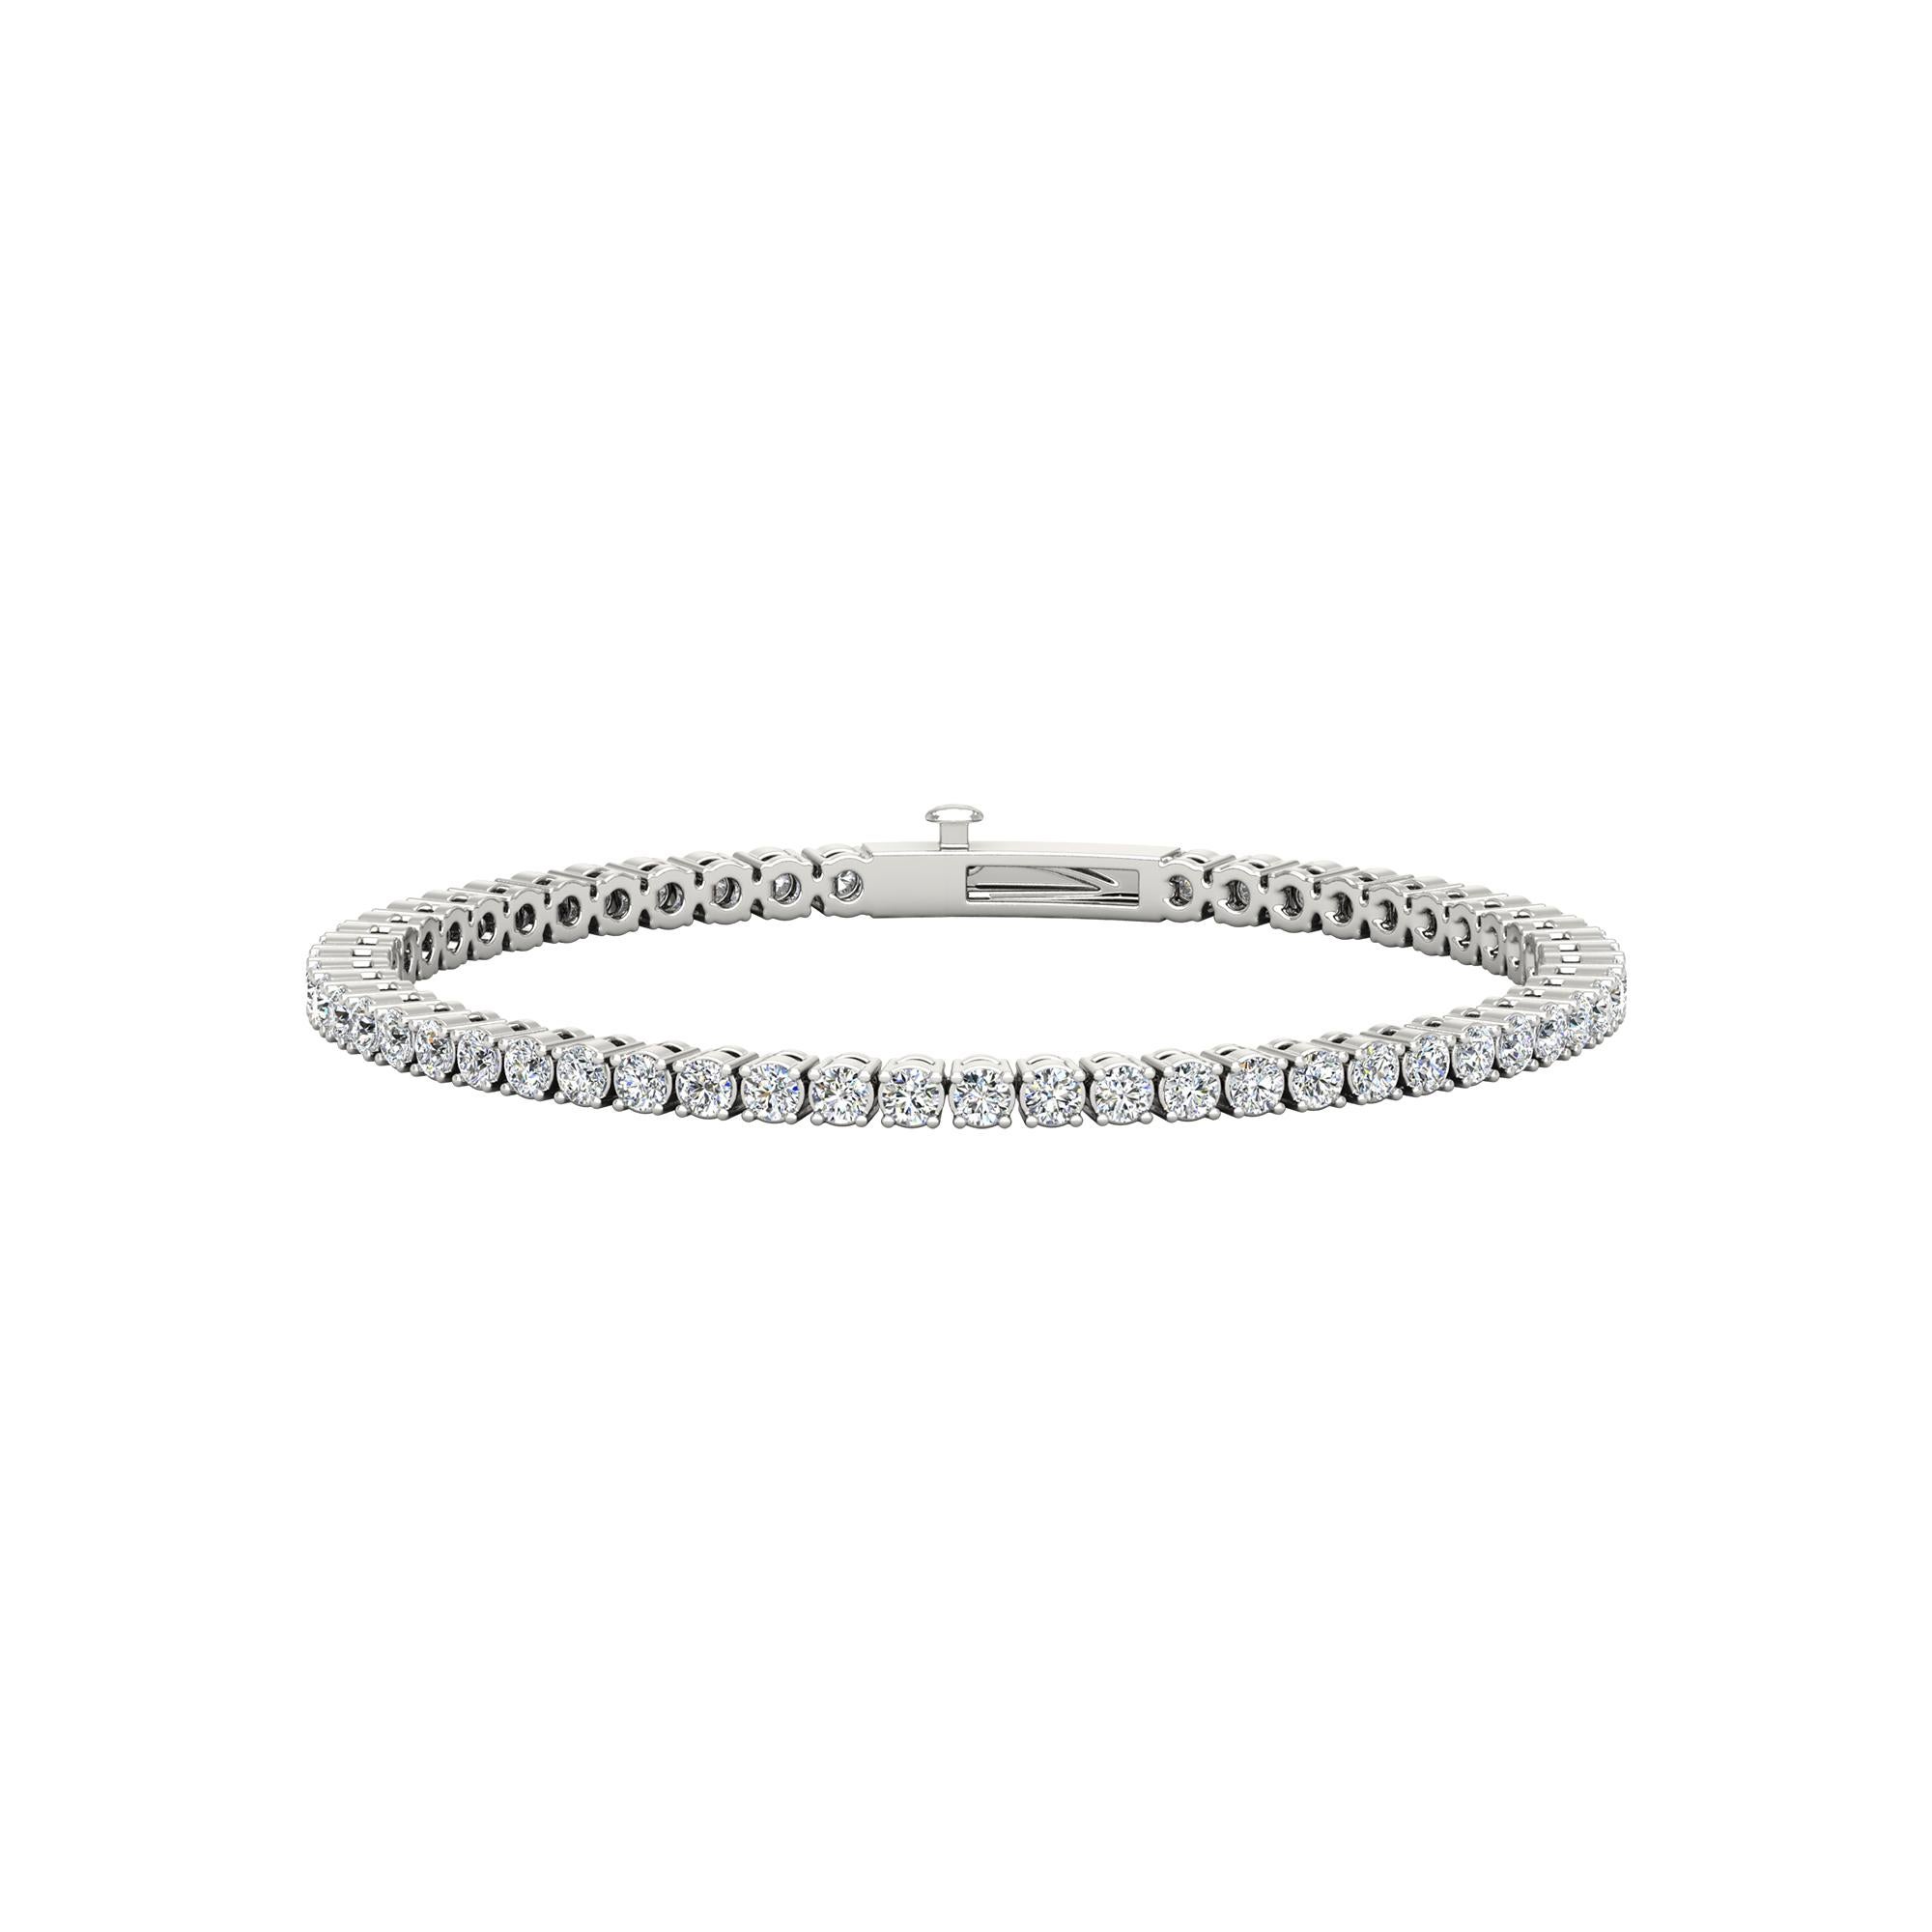 Make your outfit sparkle with this tennis bracelets features beautifully matched round natural diamonds. Elegance for every moment. 

METAL DETAILS: 18K White Gold 
DIAMOND DETAILS: Natural, Ethically sourced &, Conflict free.
DIAMOND SHAPES : 